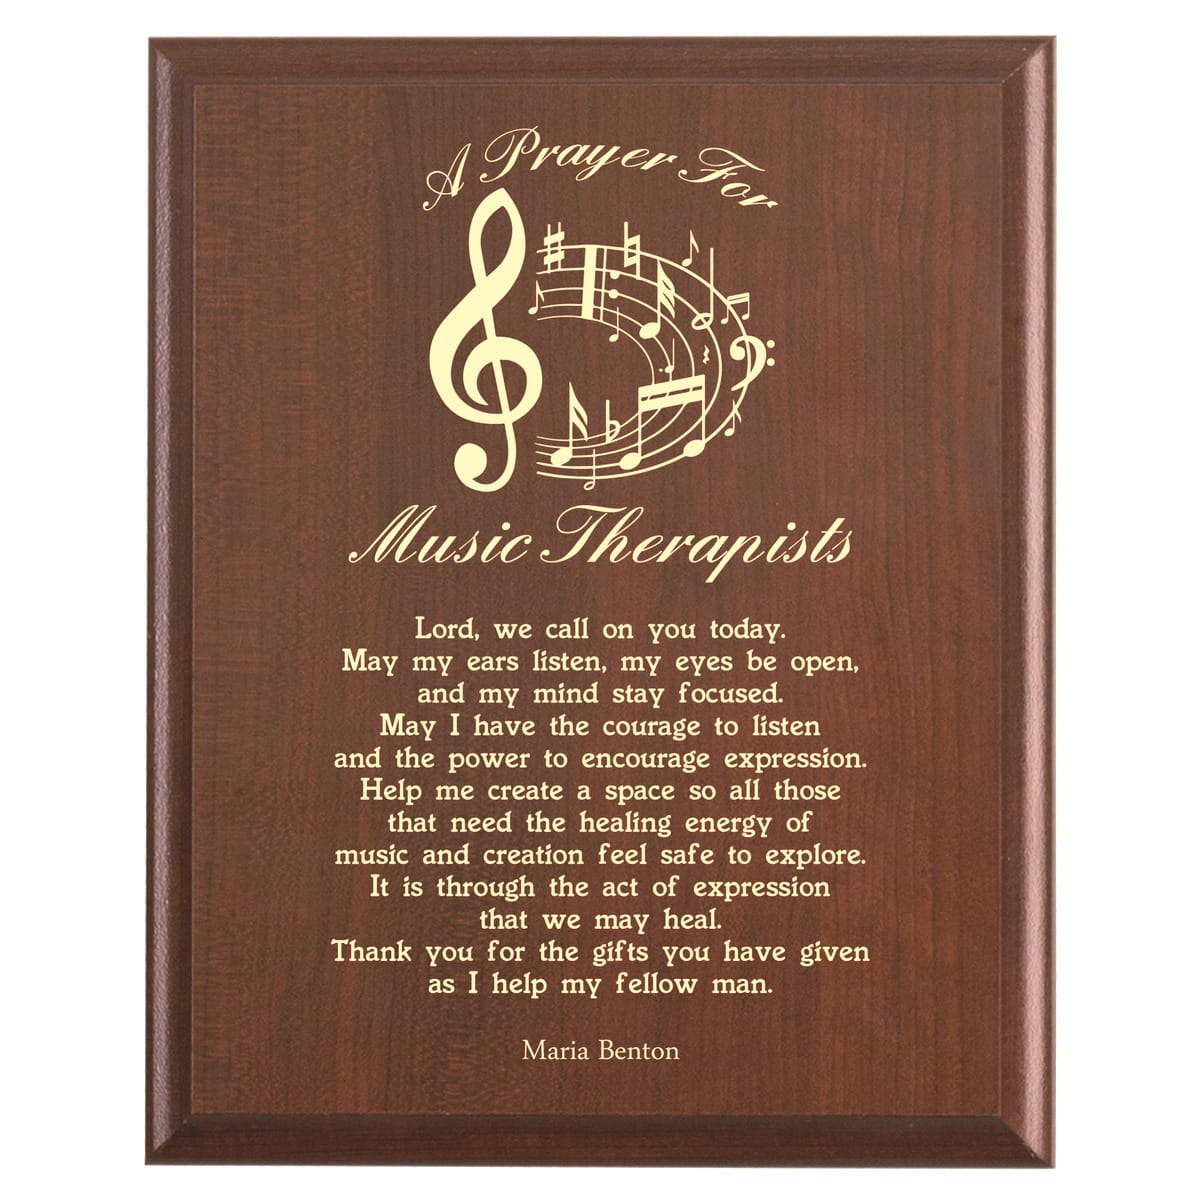 Plaque photo: Music Therapist Prayer Plaque design with free personalization. Wood style finish with customized text.